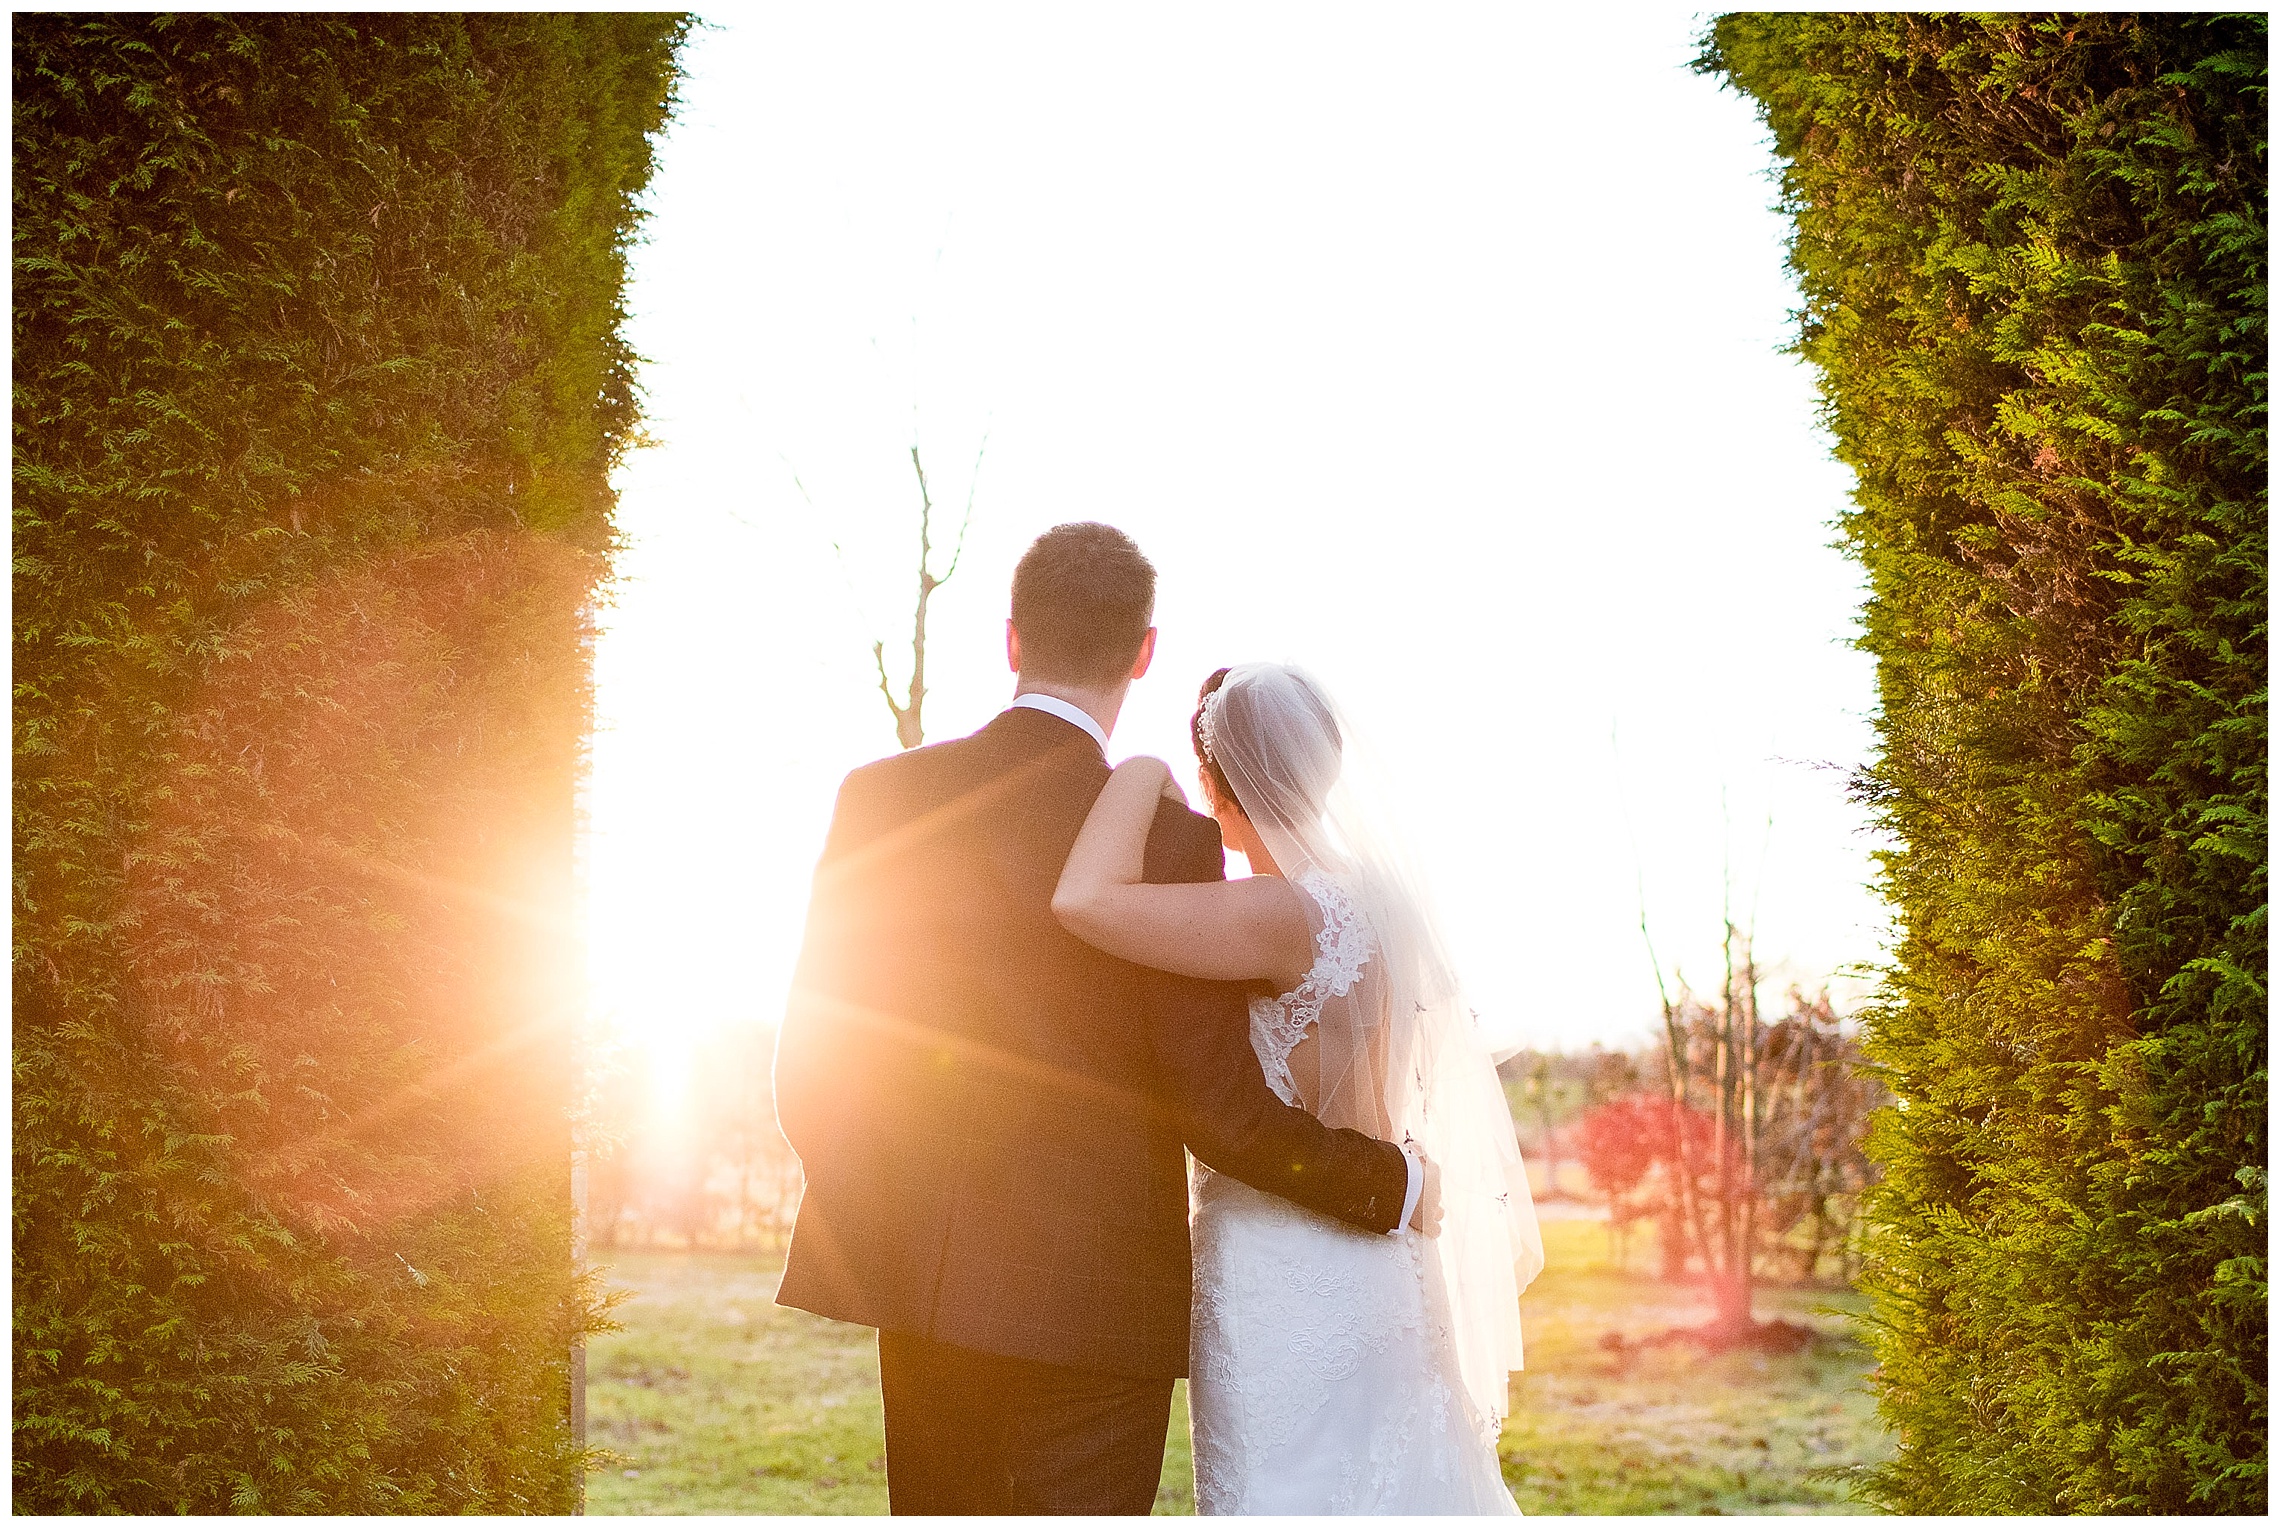 Bride and groom watch the sunset in the garden at south farm wedding venue